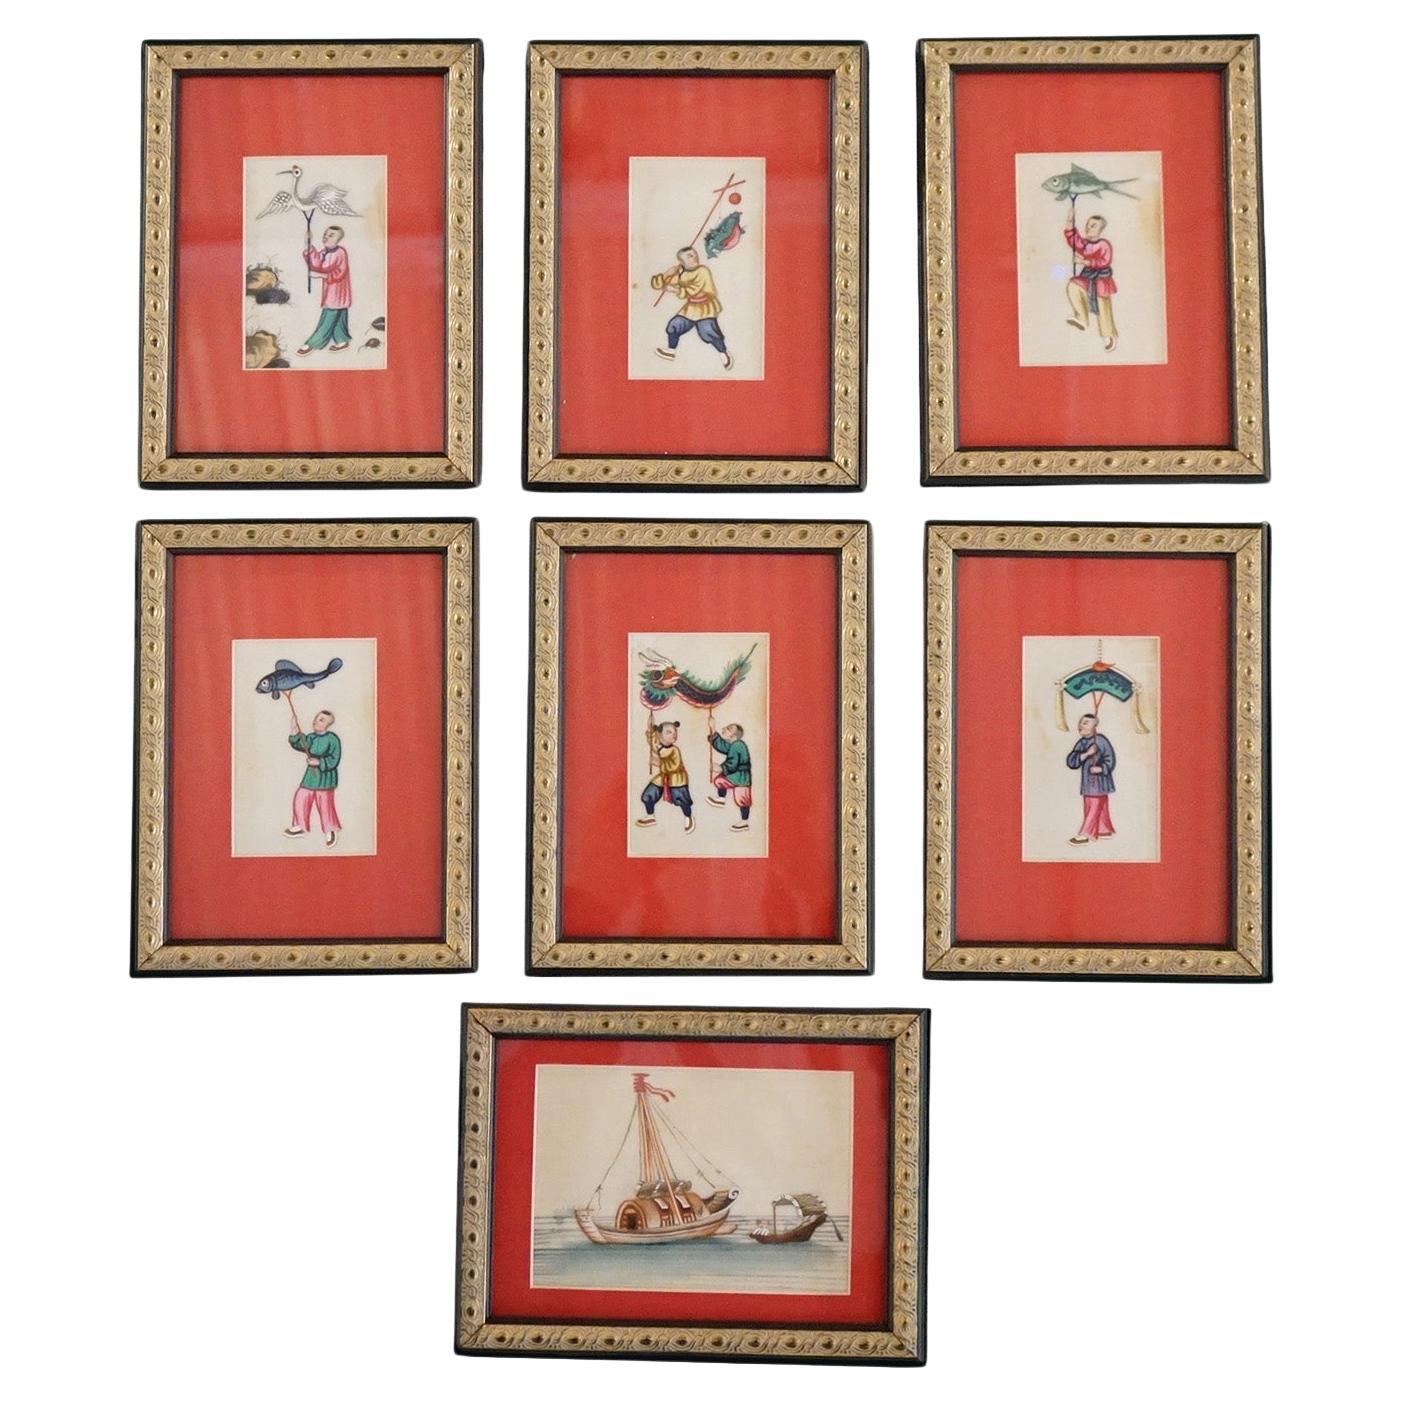 Seven Chinese Miniature Figural Paintings on Silk, Framed, 20thC